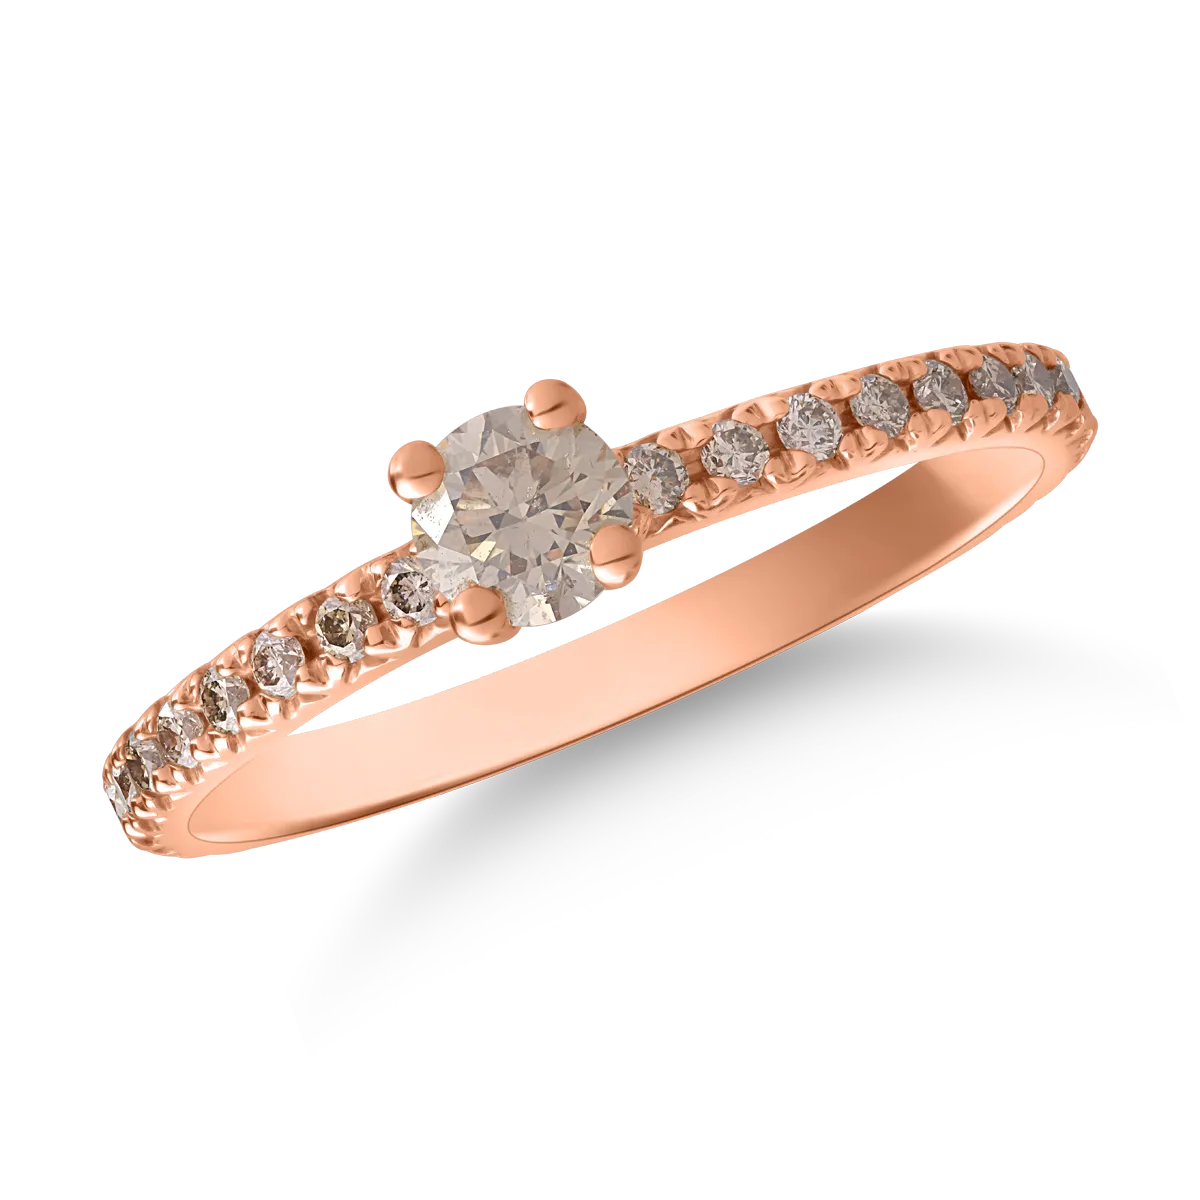 18K rose gold ring with 0.57ct brown diamonds